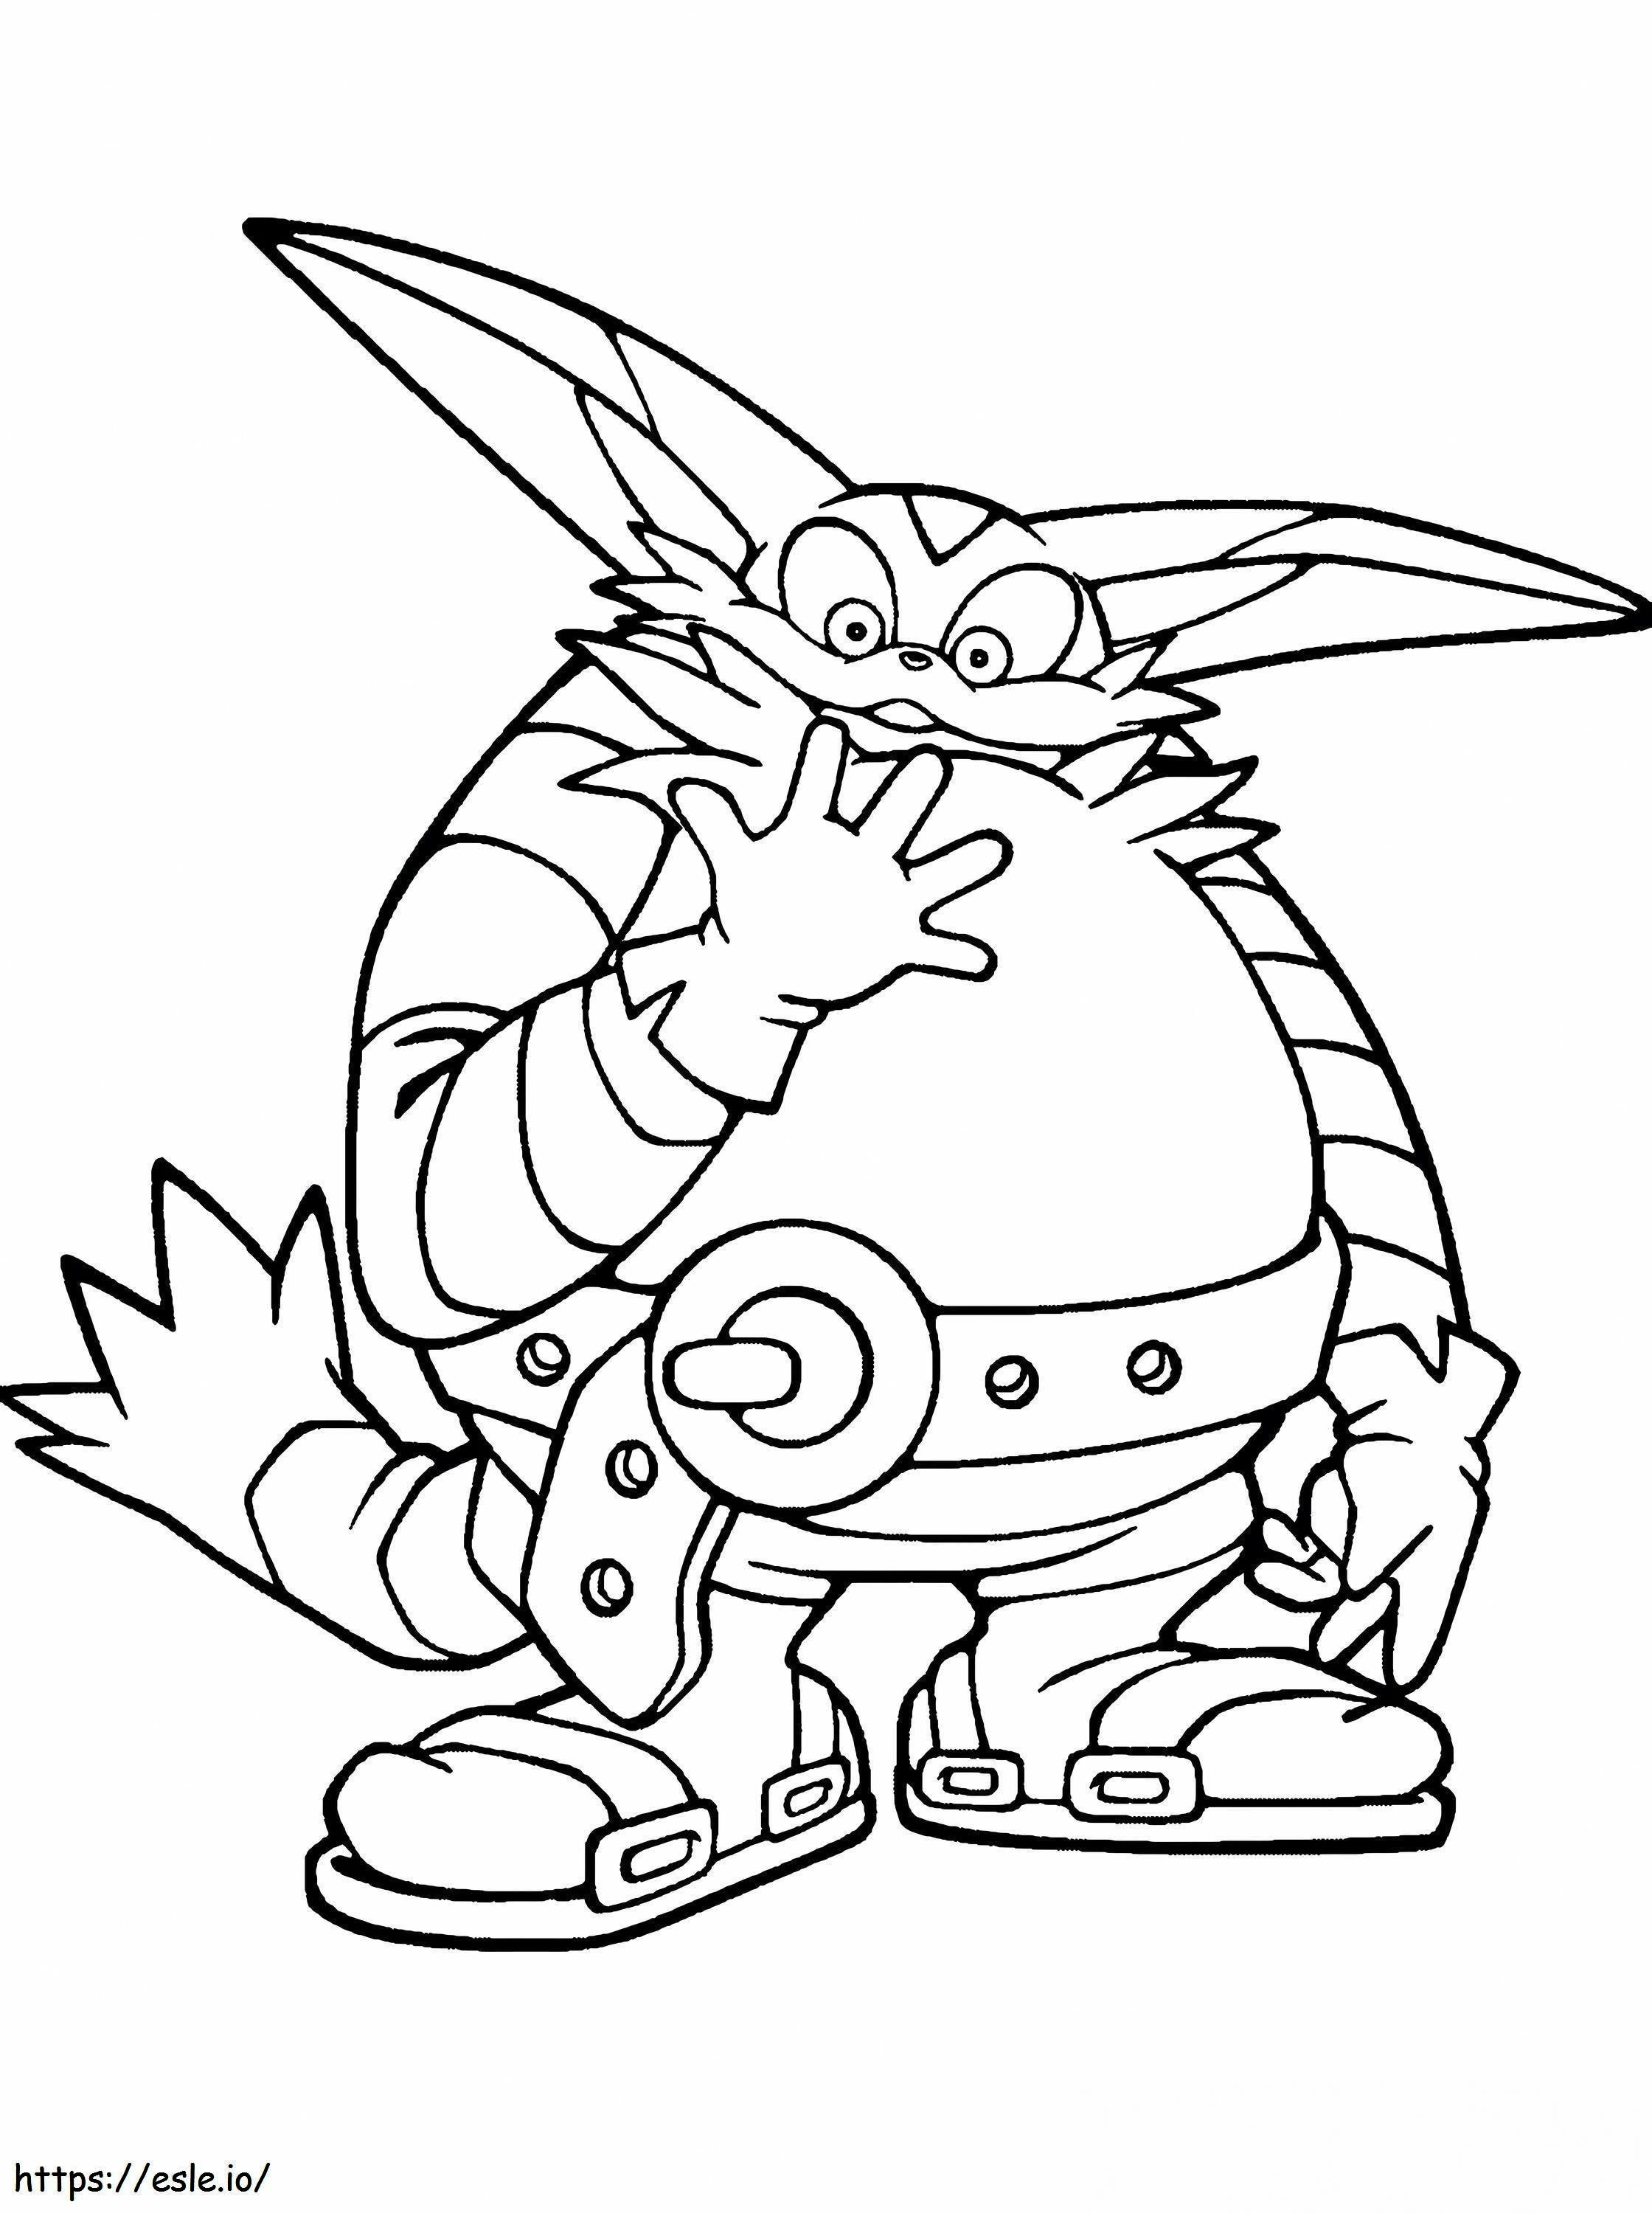 1573433645 1433776935 3 coloring page